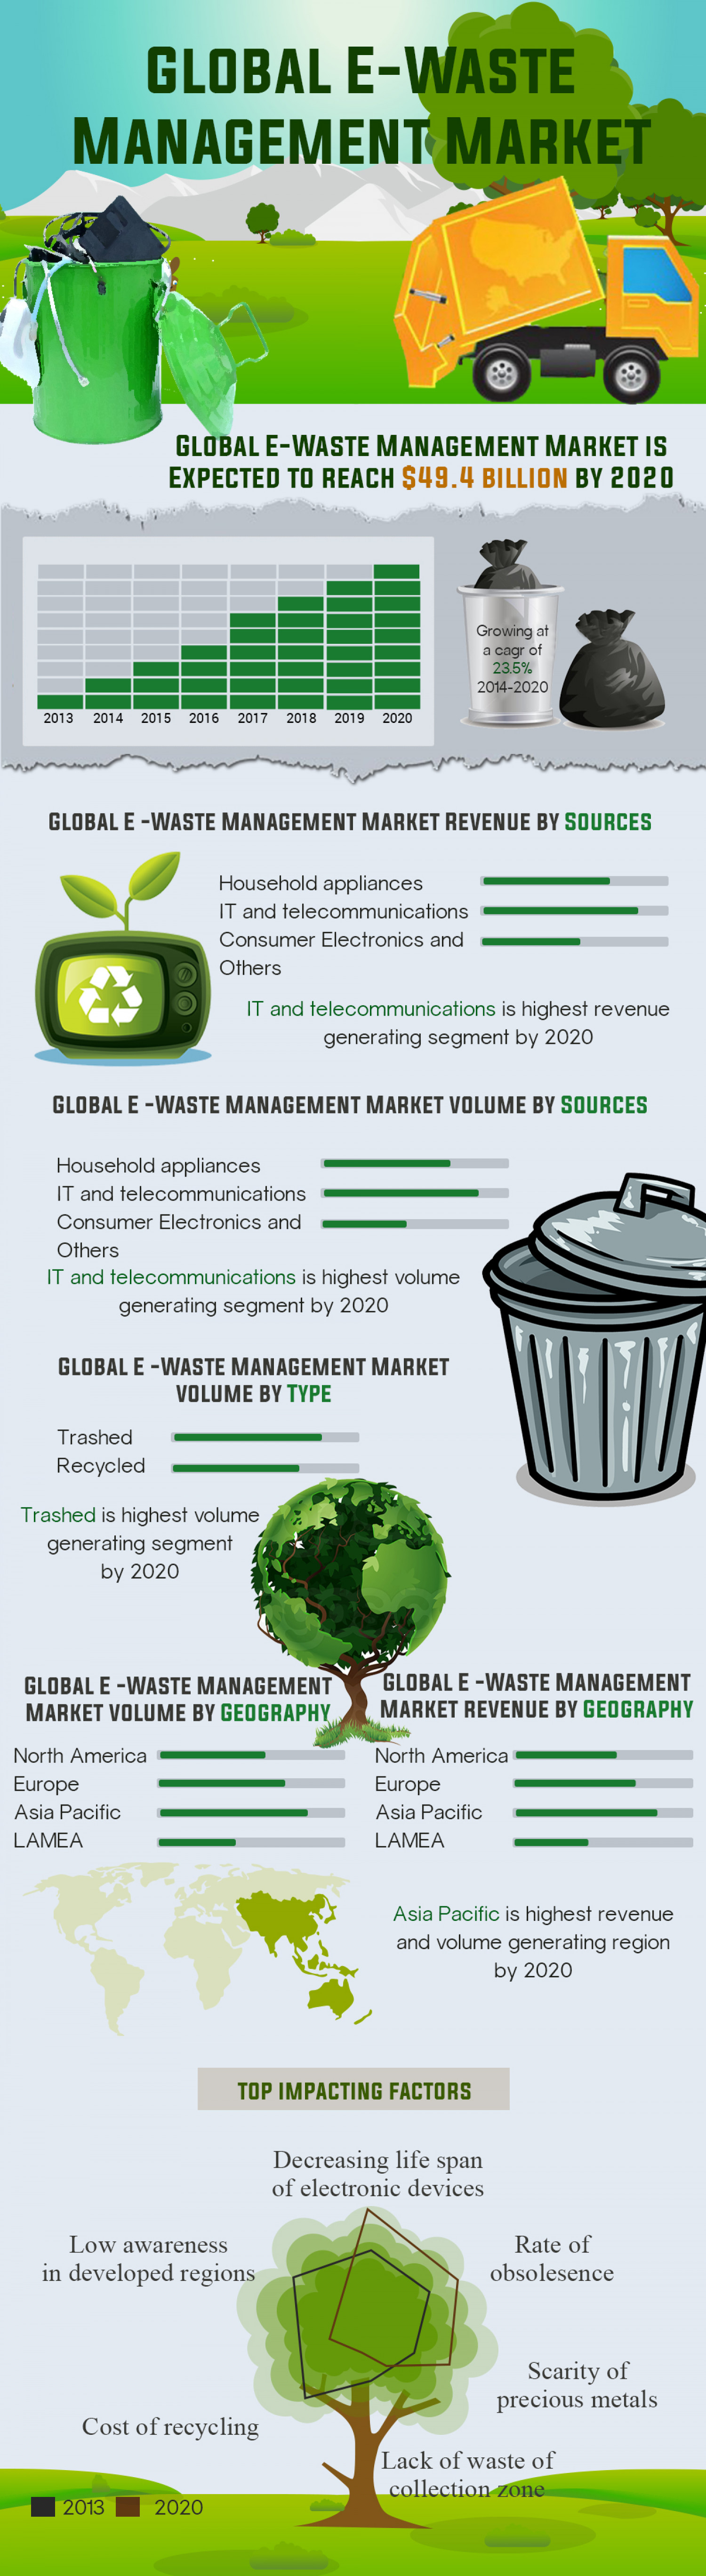 Global E-Waste Management Market (Types, Sources and Geography) - Size, Share, Global Trends, Company Profiles, Demand, Insights, Analysis, Research, Report, Opportunities, Segmentation and Forecast, 2013 - 2020 Infographic